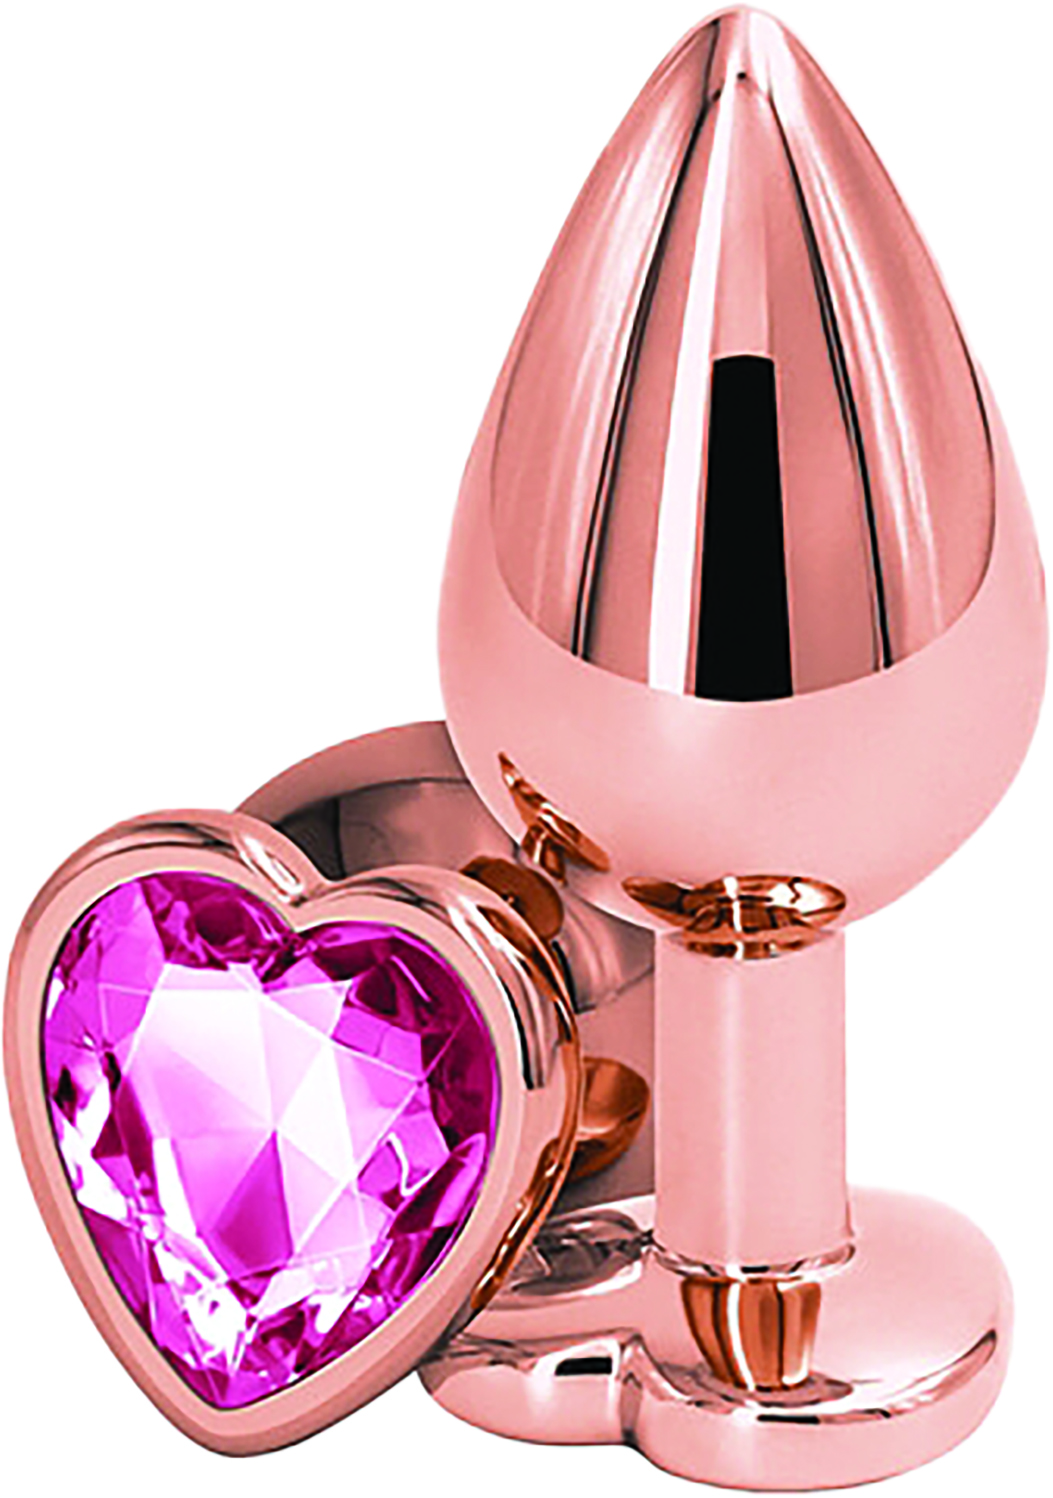 Dop Anal Brilliant Anal Plug Small, Rose Gold, Piatra Roz Inchis, Passion Labs